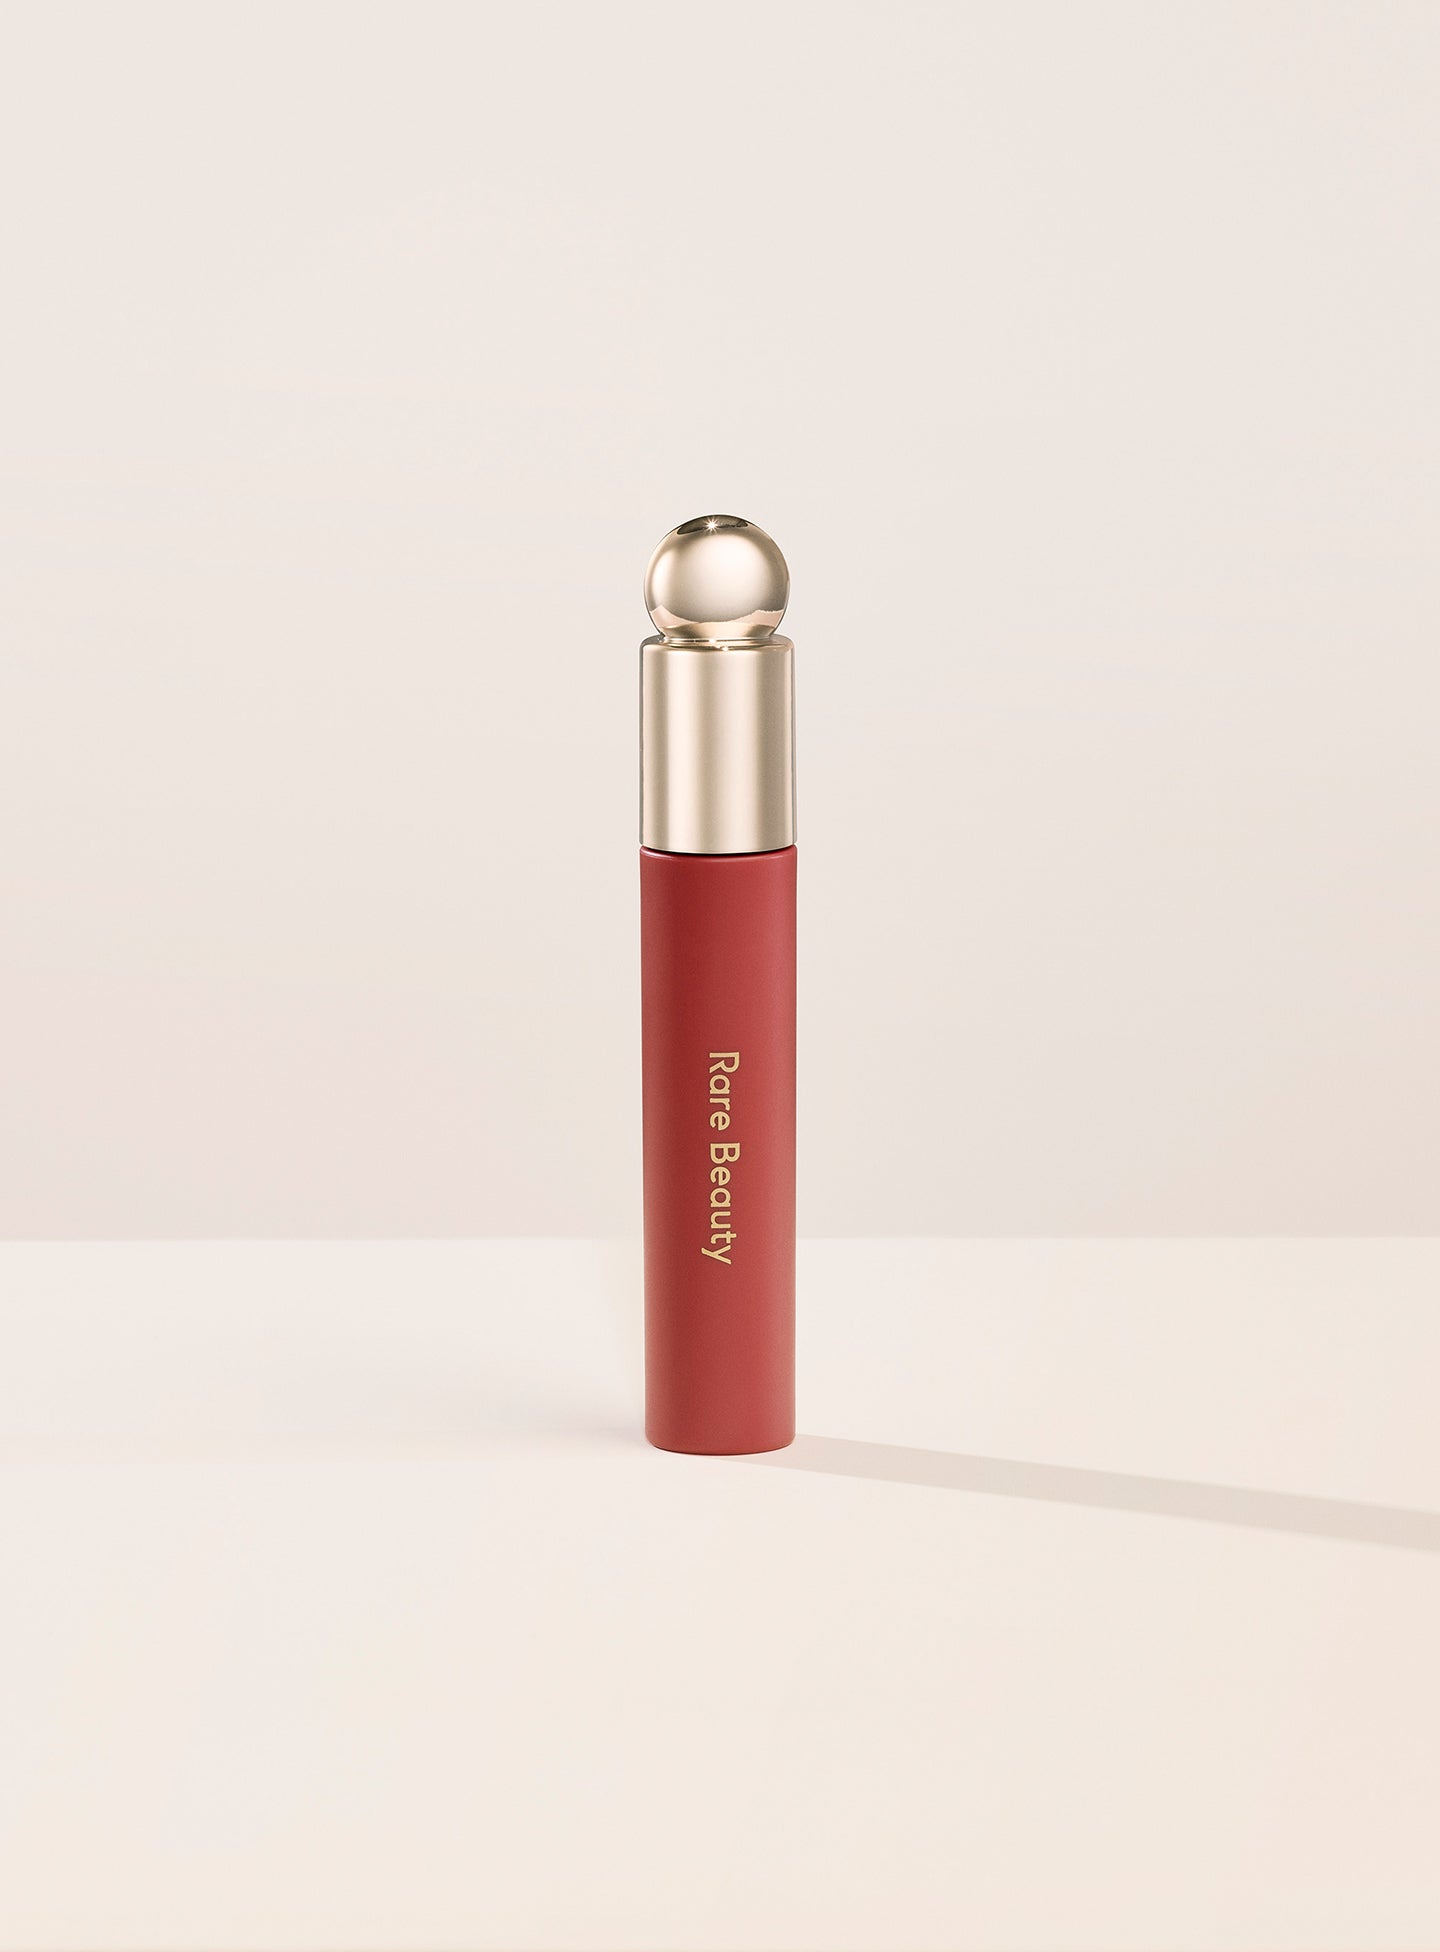 Serenity Soft Pinch Tinted Lip oIL; Rare Beauty